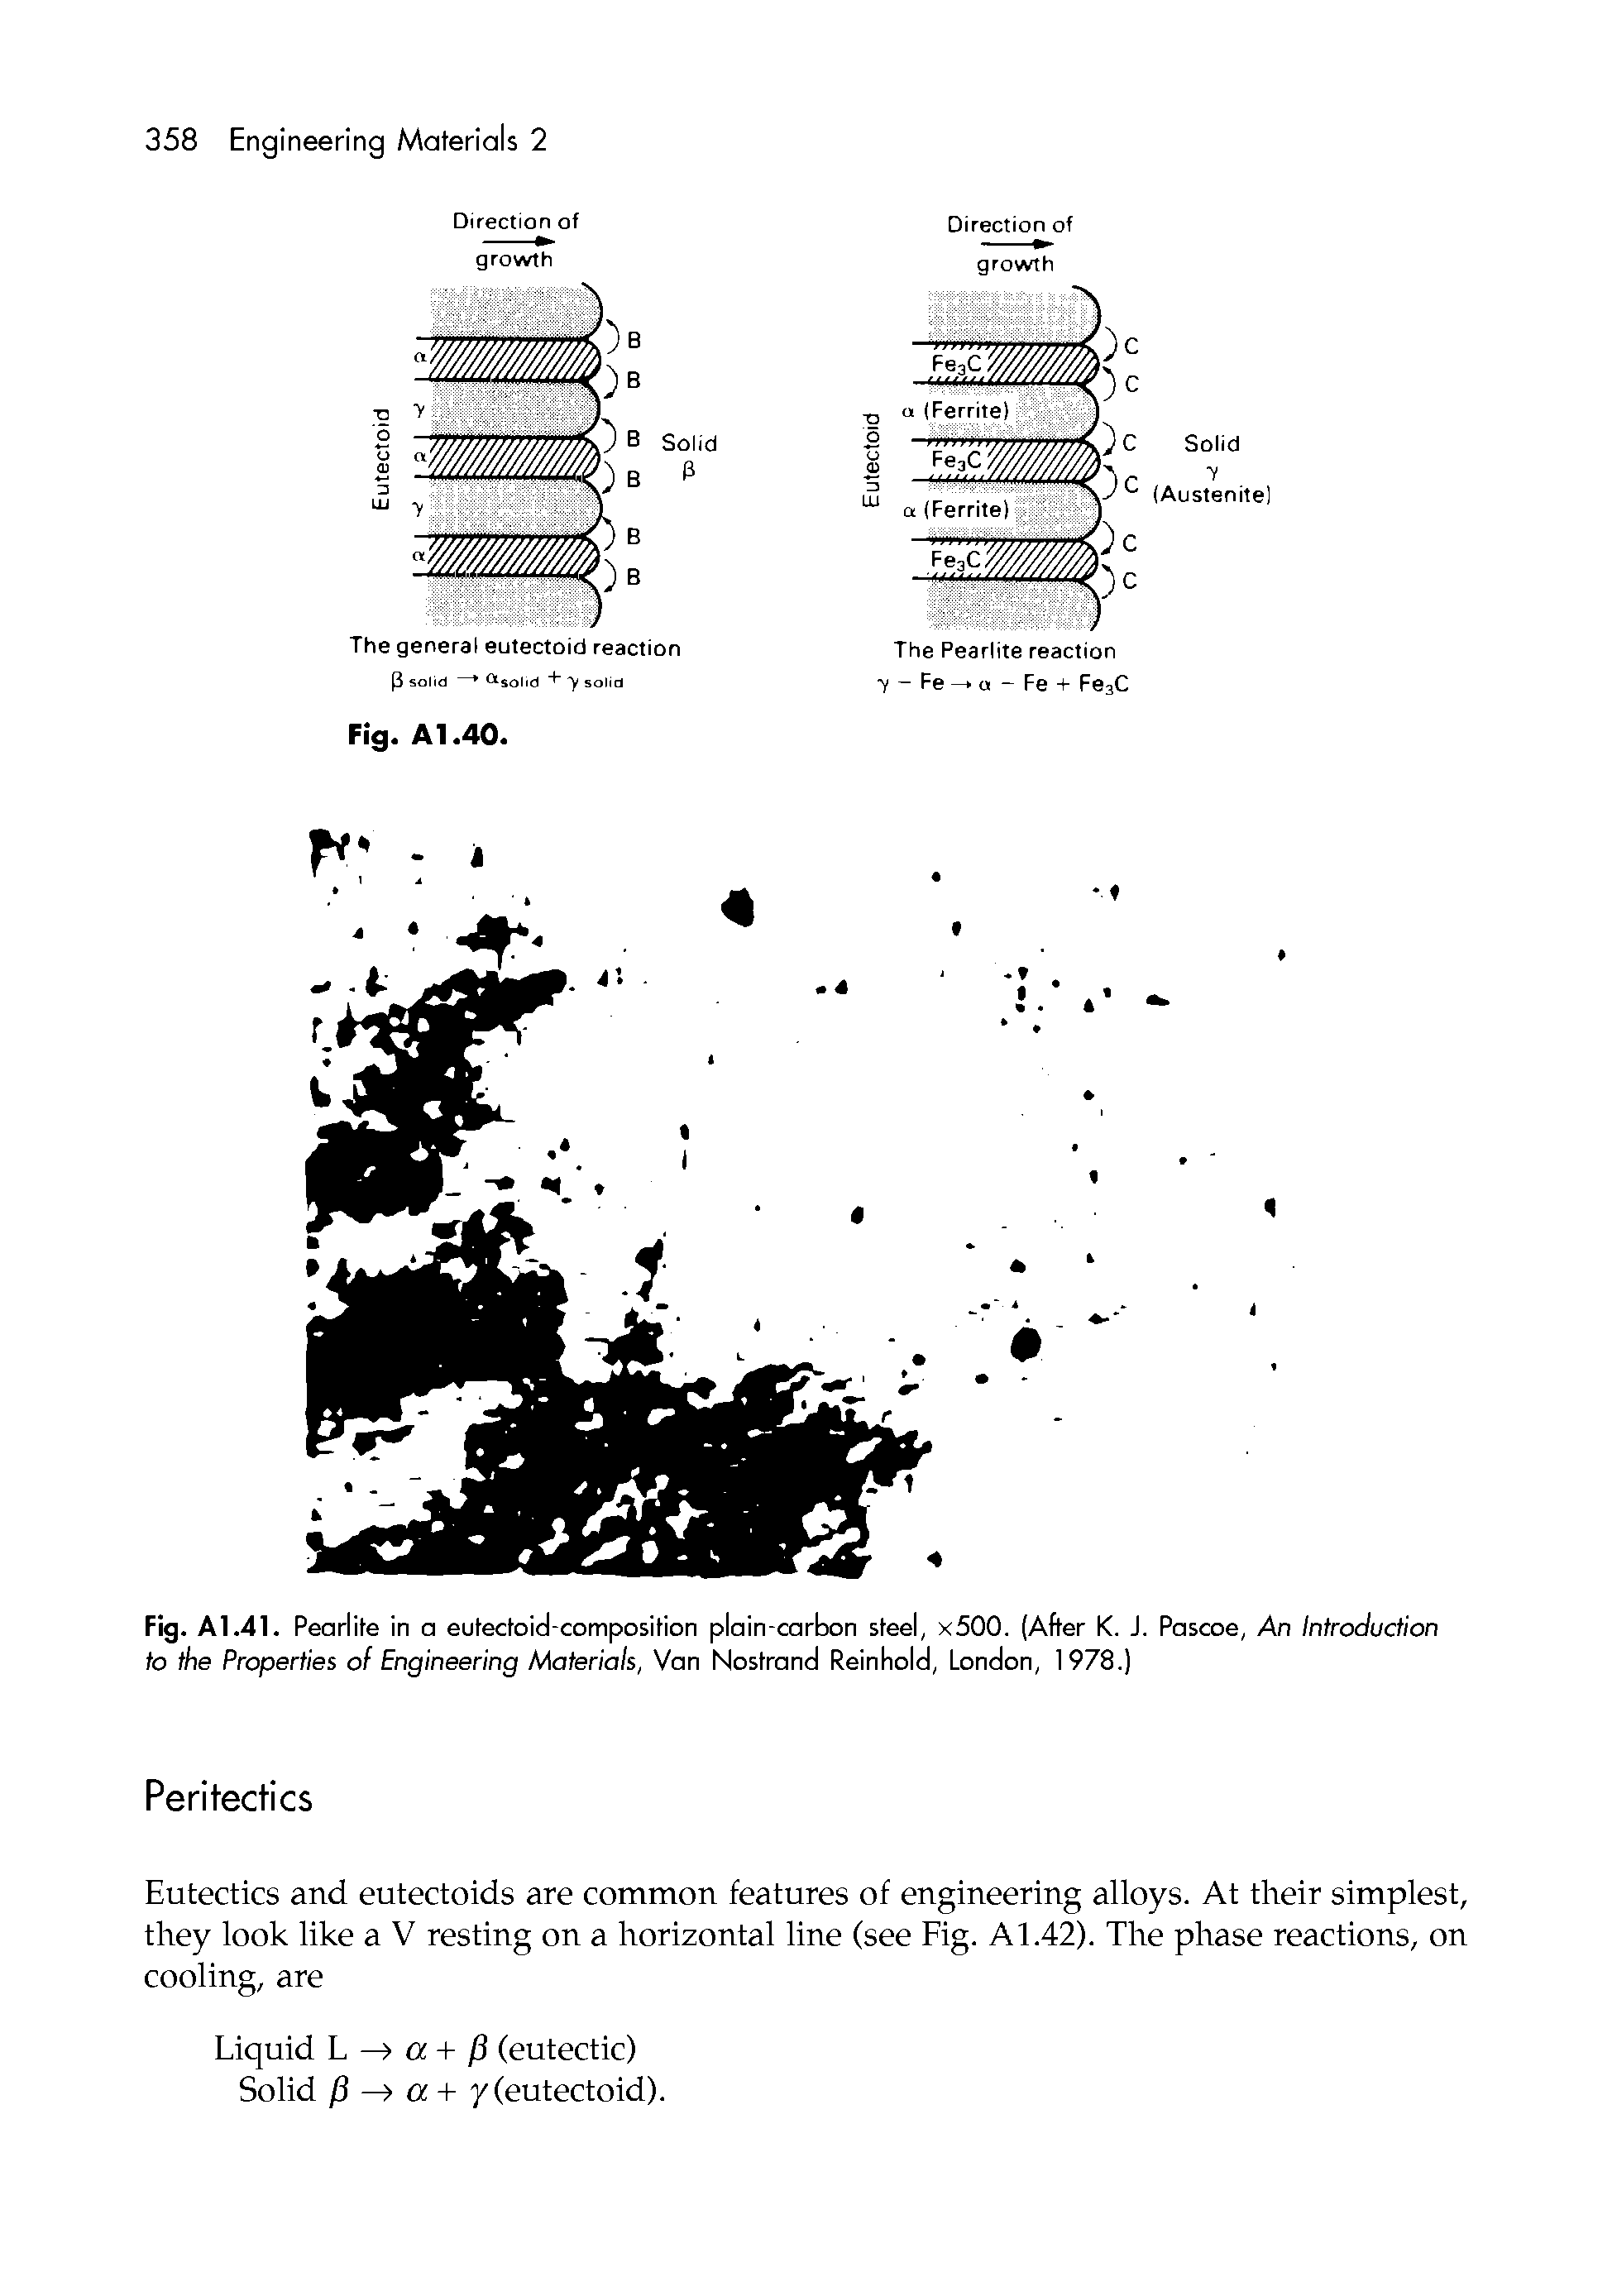 Fig. A1.41. Pearlite in a eutectoid-composition plain-carbon steel, x500. (After K. J. Pascoe, An Introduction to the Properties of Engineering Materials, Van Nostrand Reinhold, London, 1978.)...